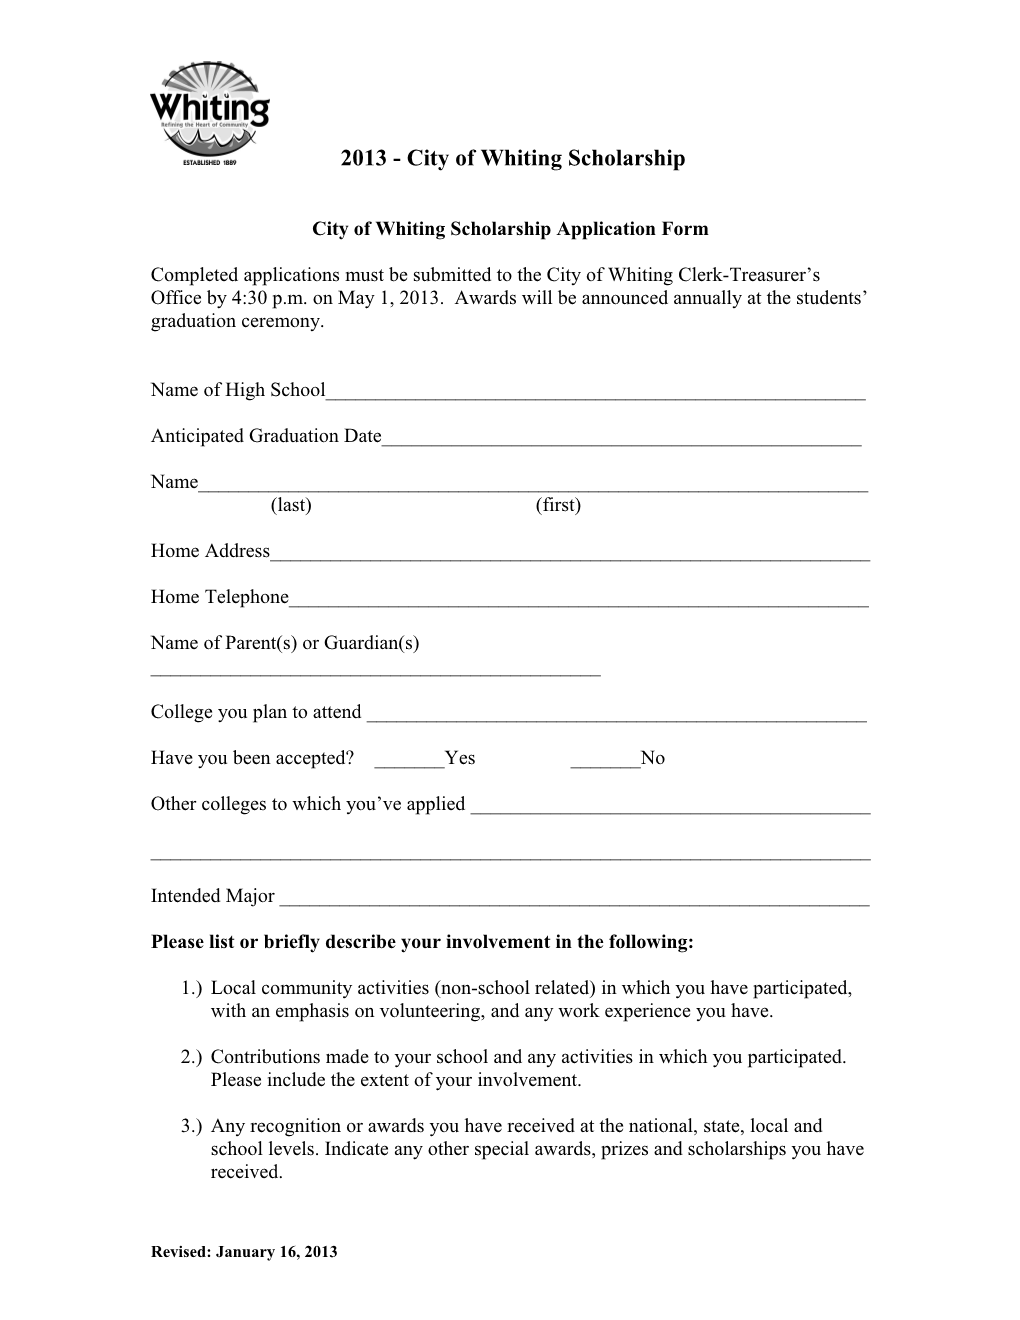 The City of Whiting Scholarship